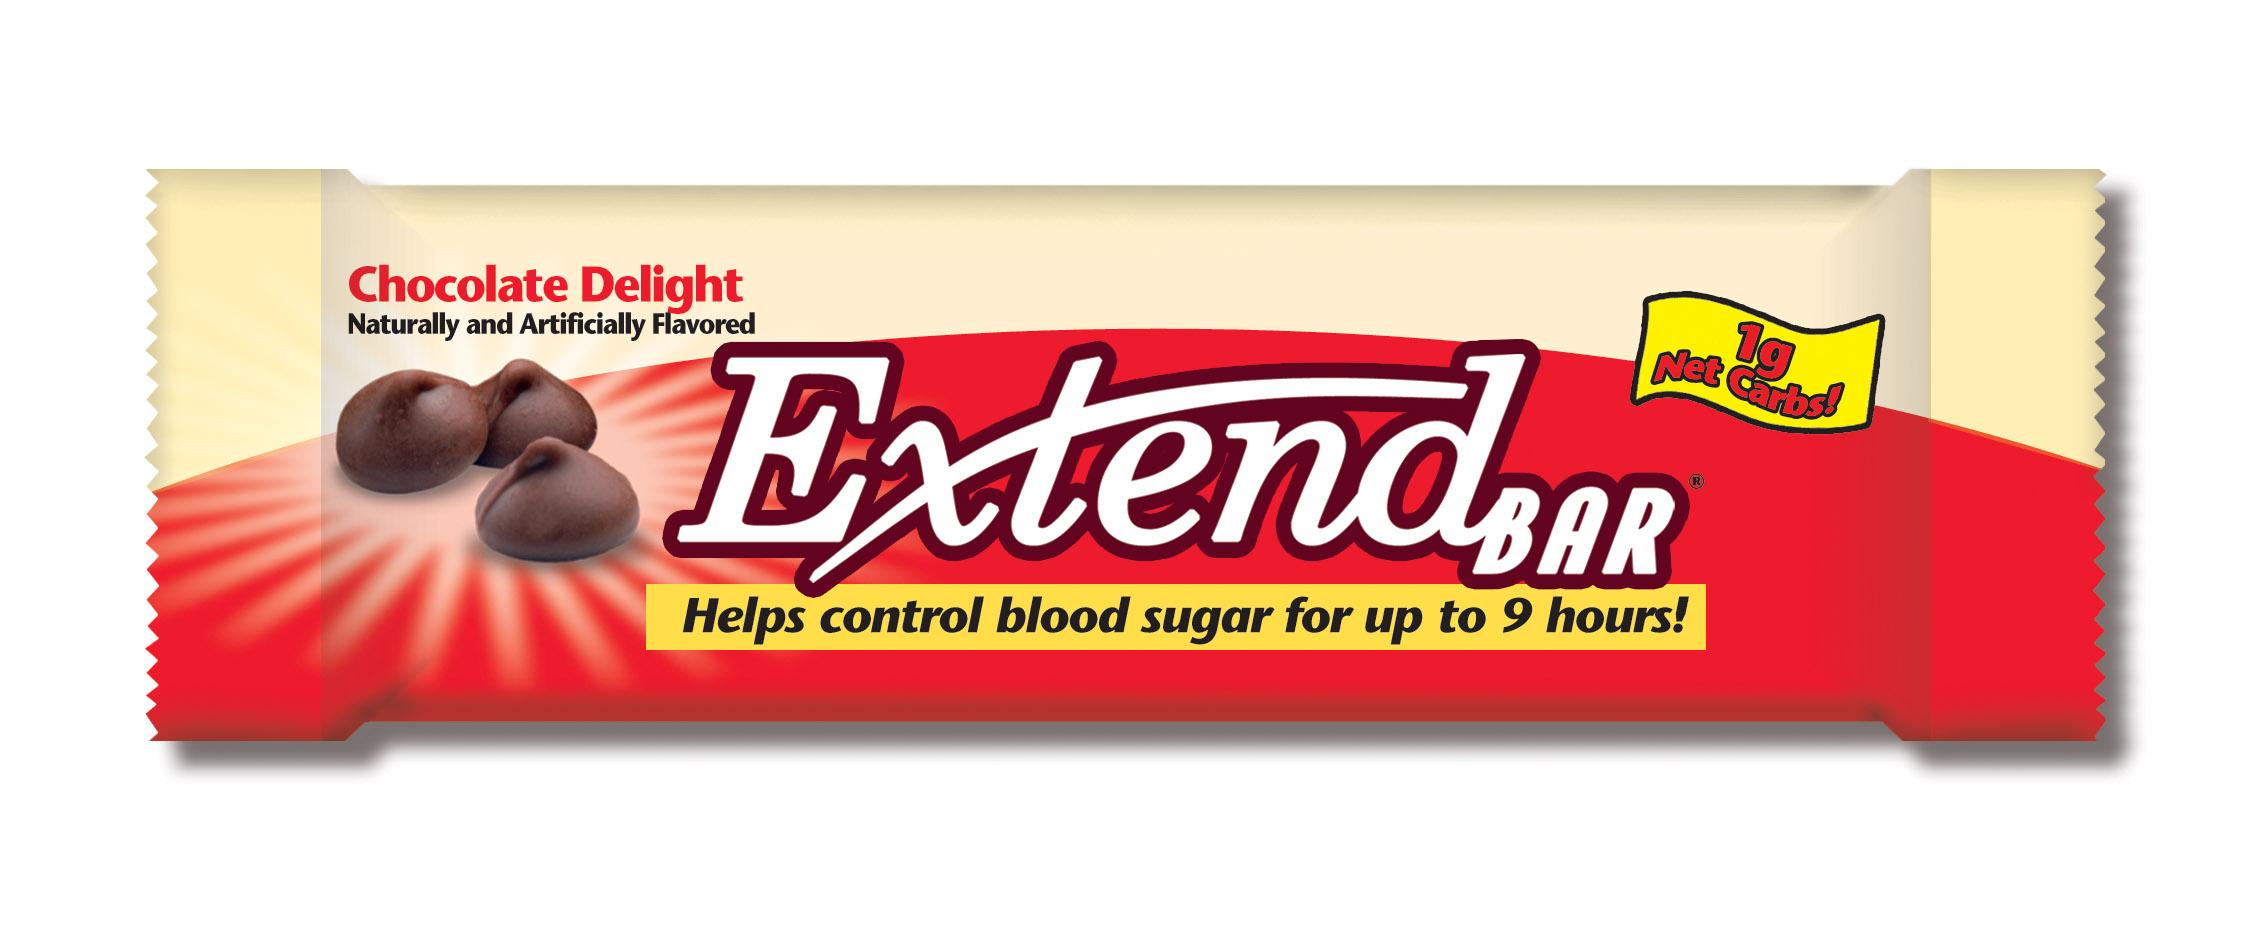 Bar Chocolate Delight Protein Bar for People with Diabetes. 